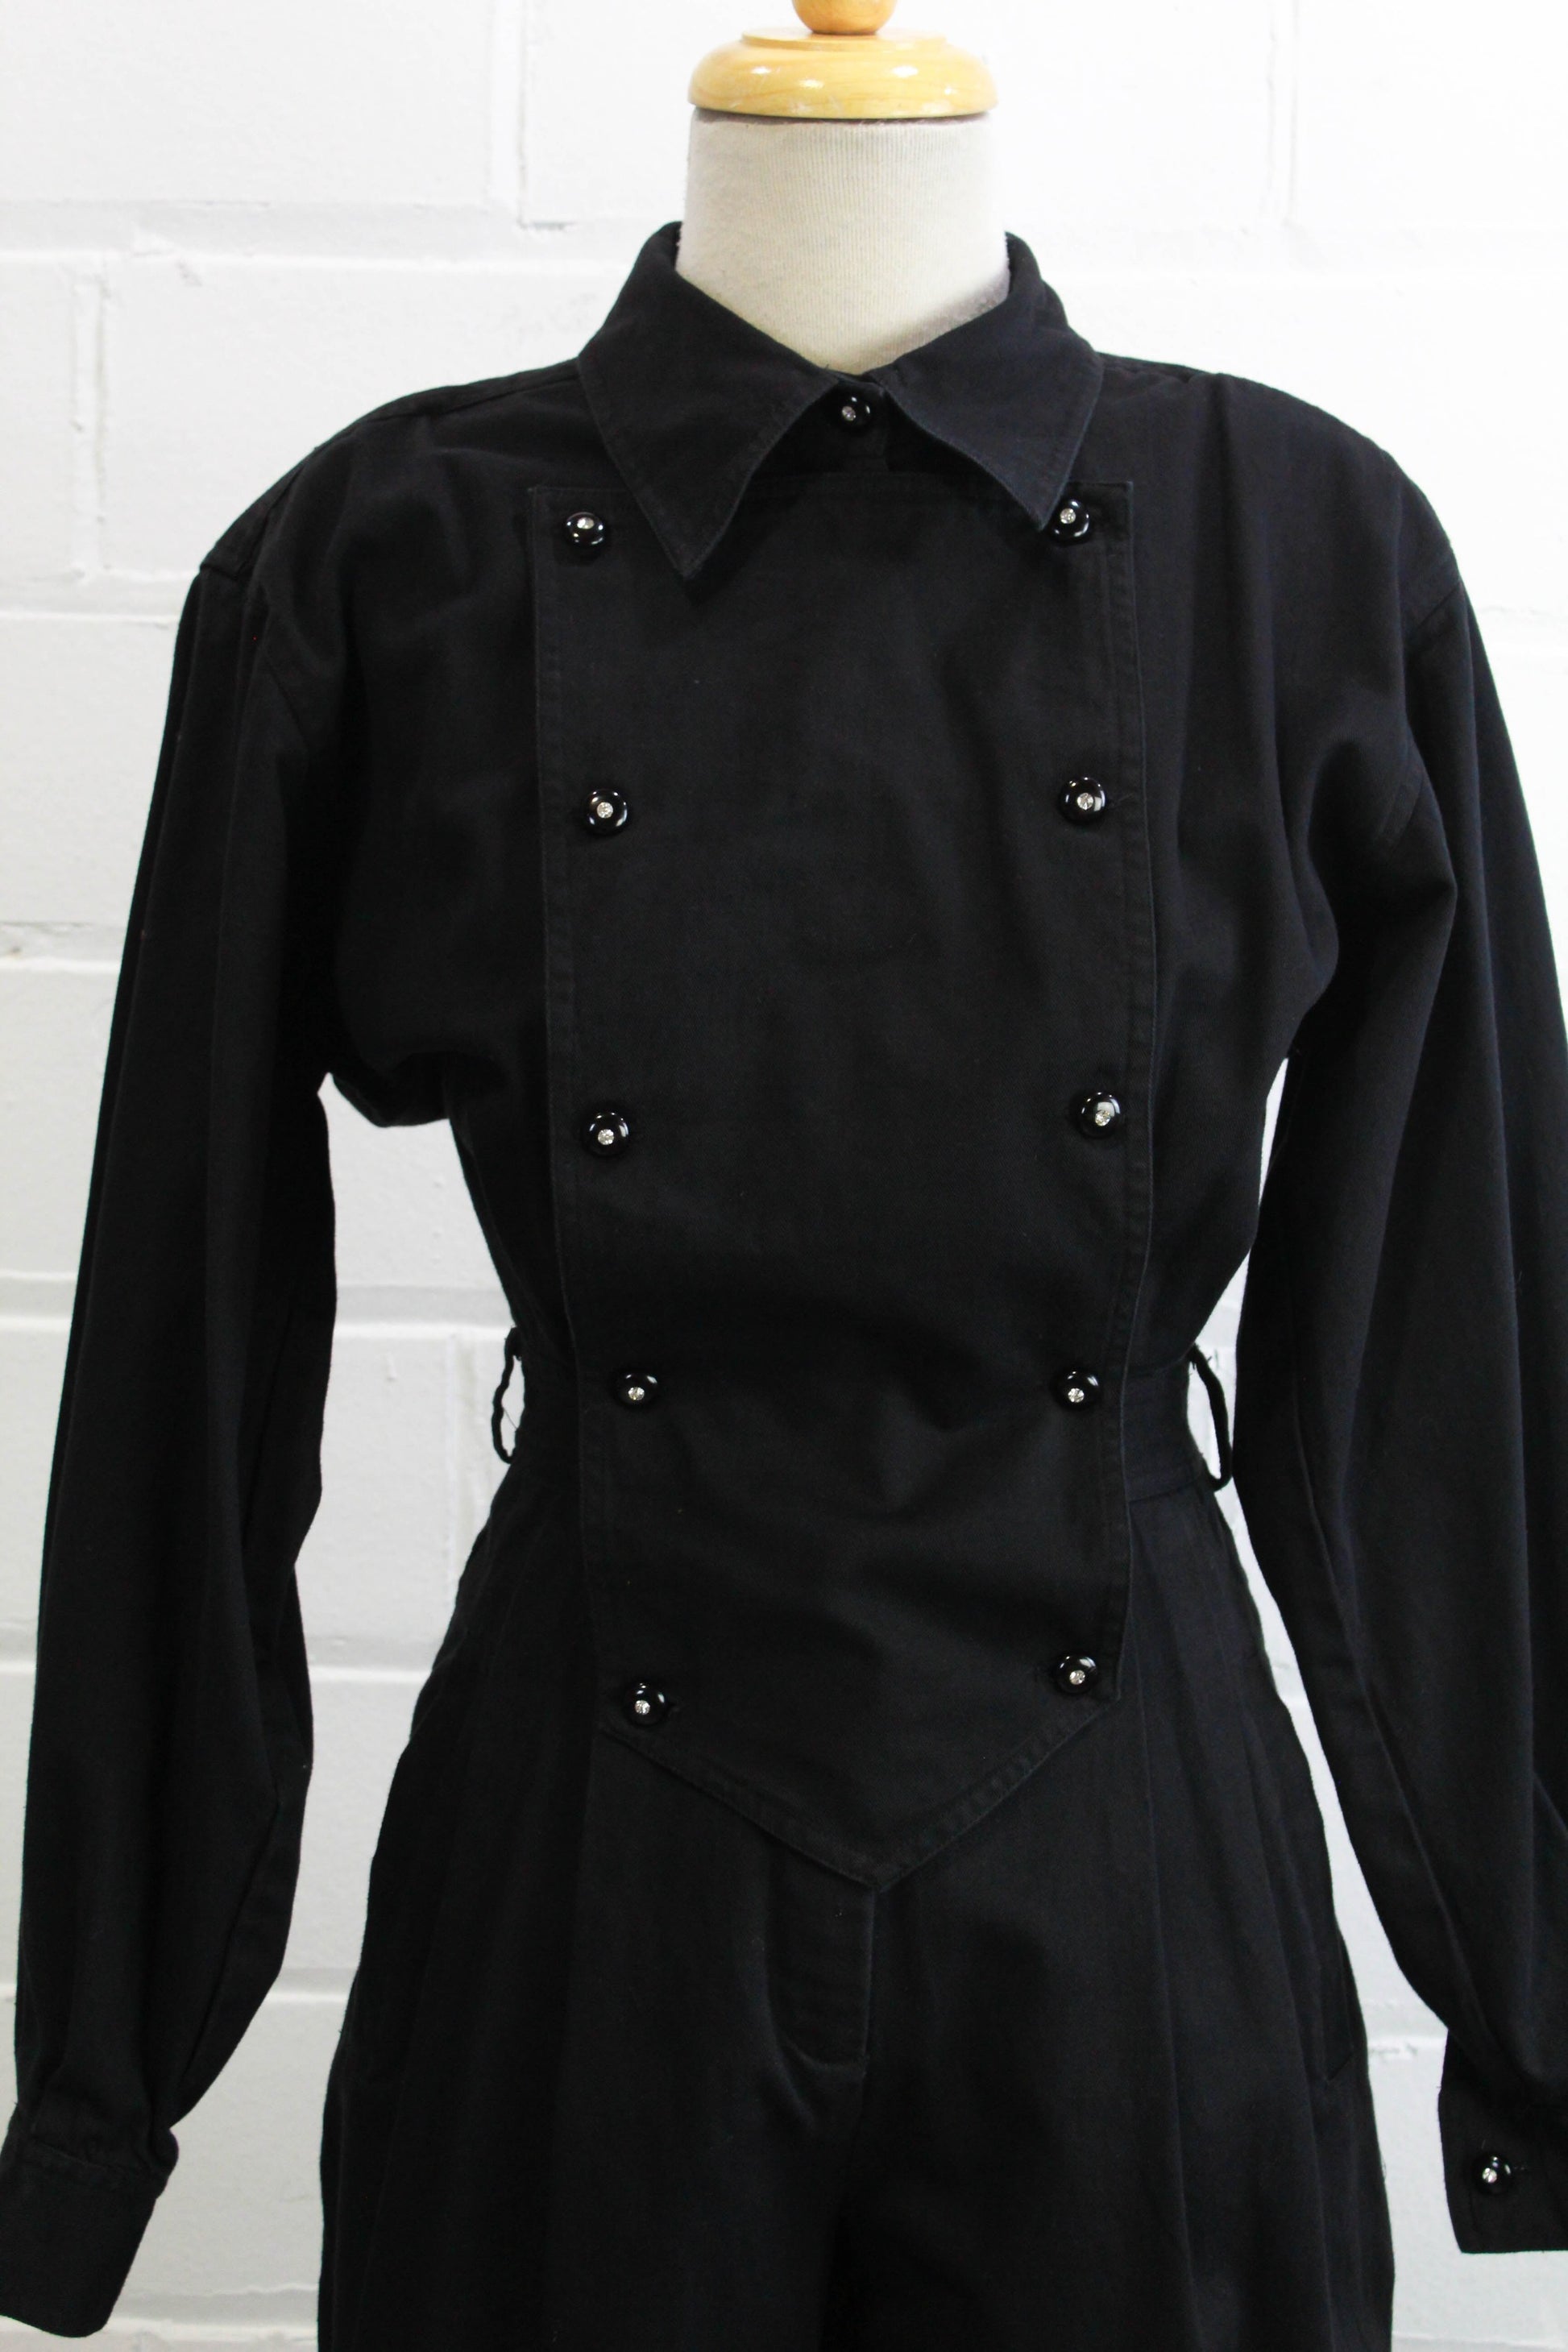 1980s womens jumpsuit black cotton with bib front, collar button up close up of front